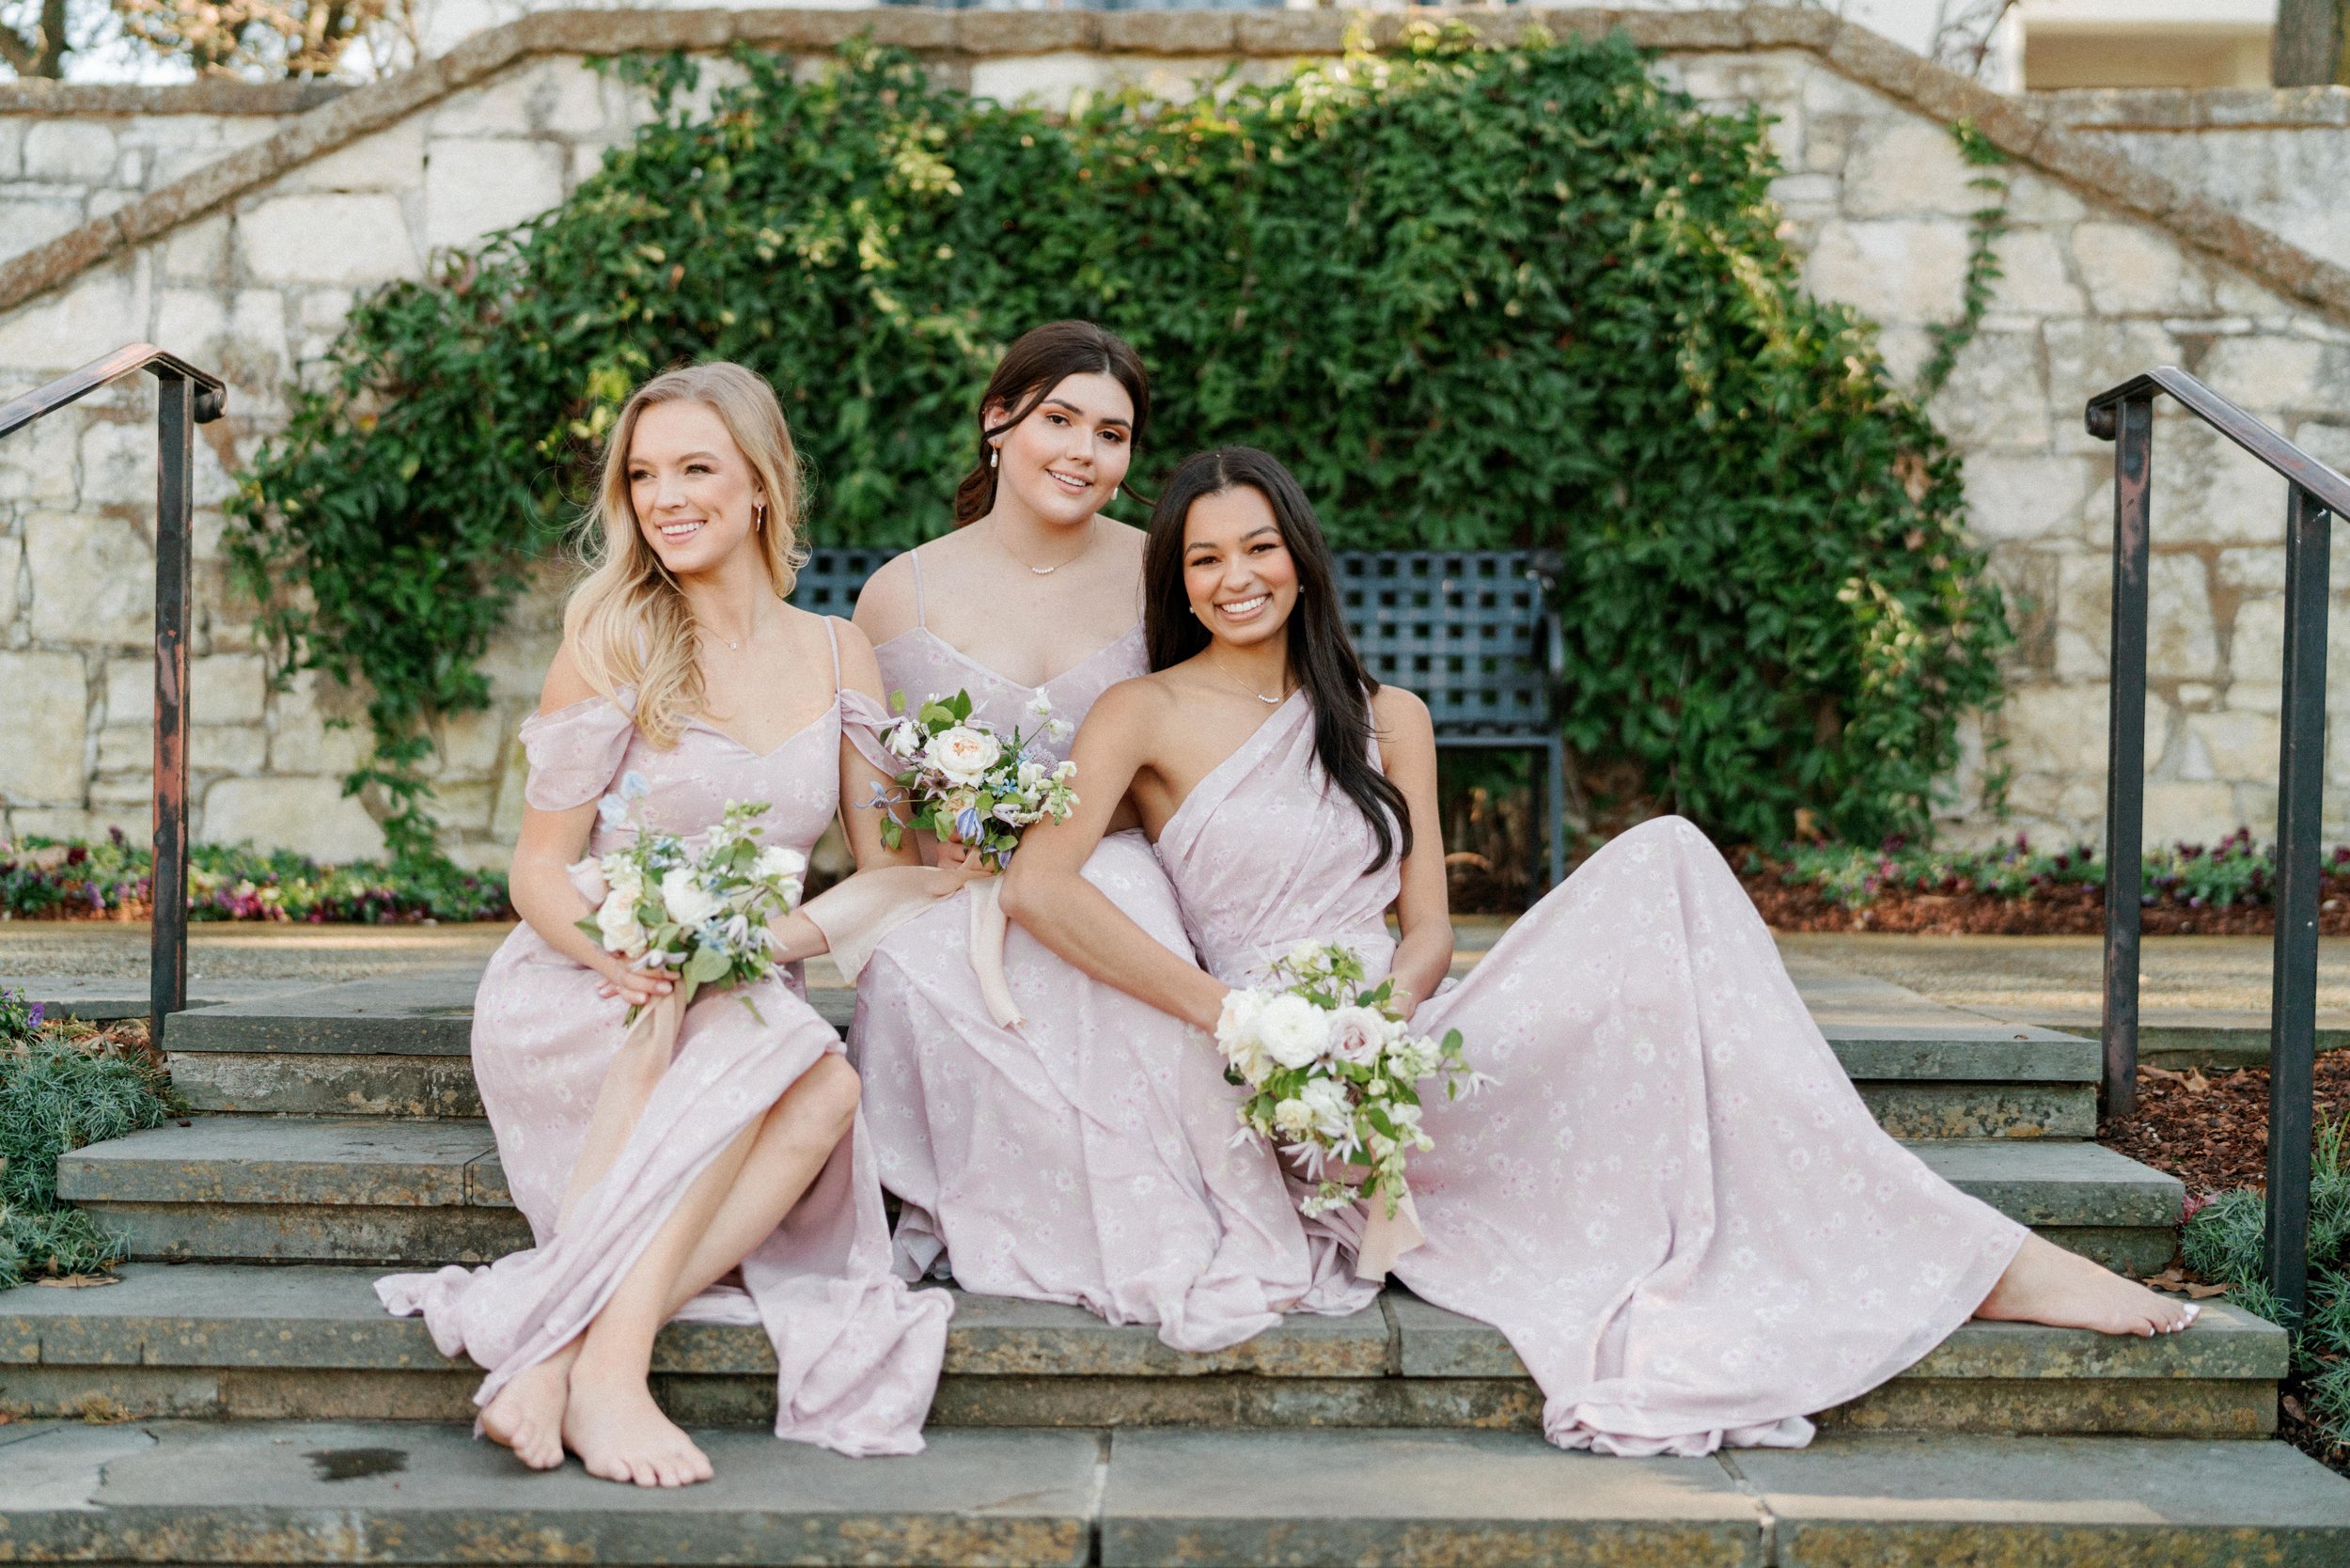 Introducing Our Brand New Line of Floral Bridesmaid Dresses, in